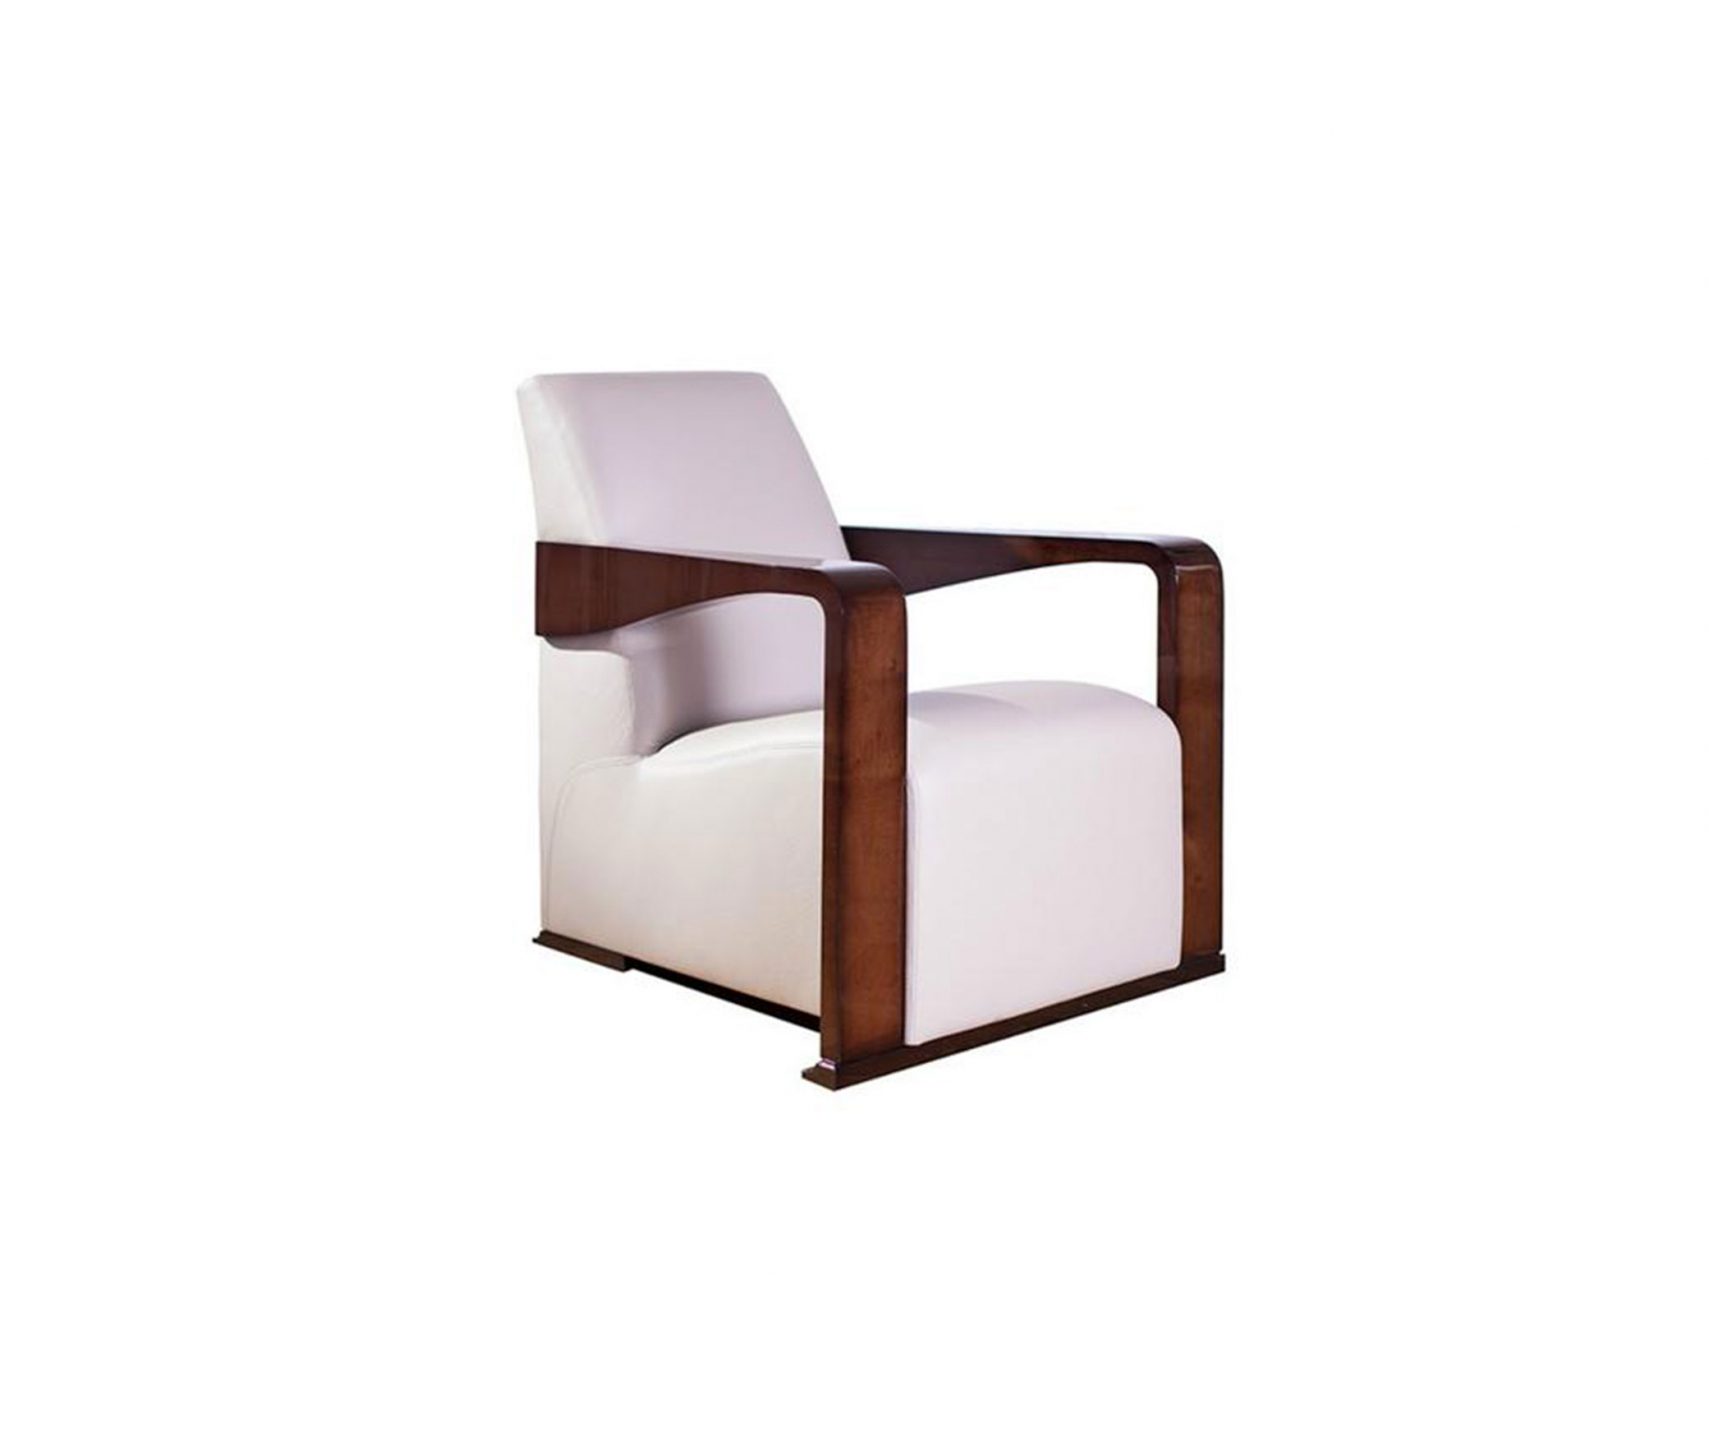 Profiles_Ying-Lounge-Chair-1_int_products